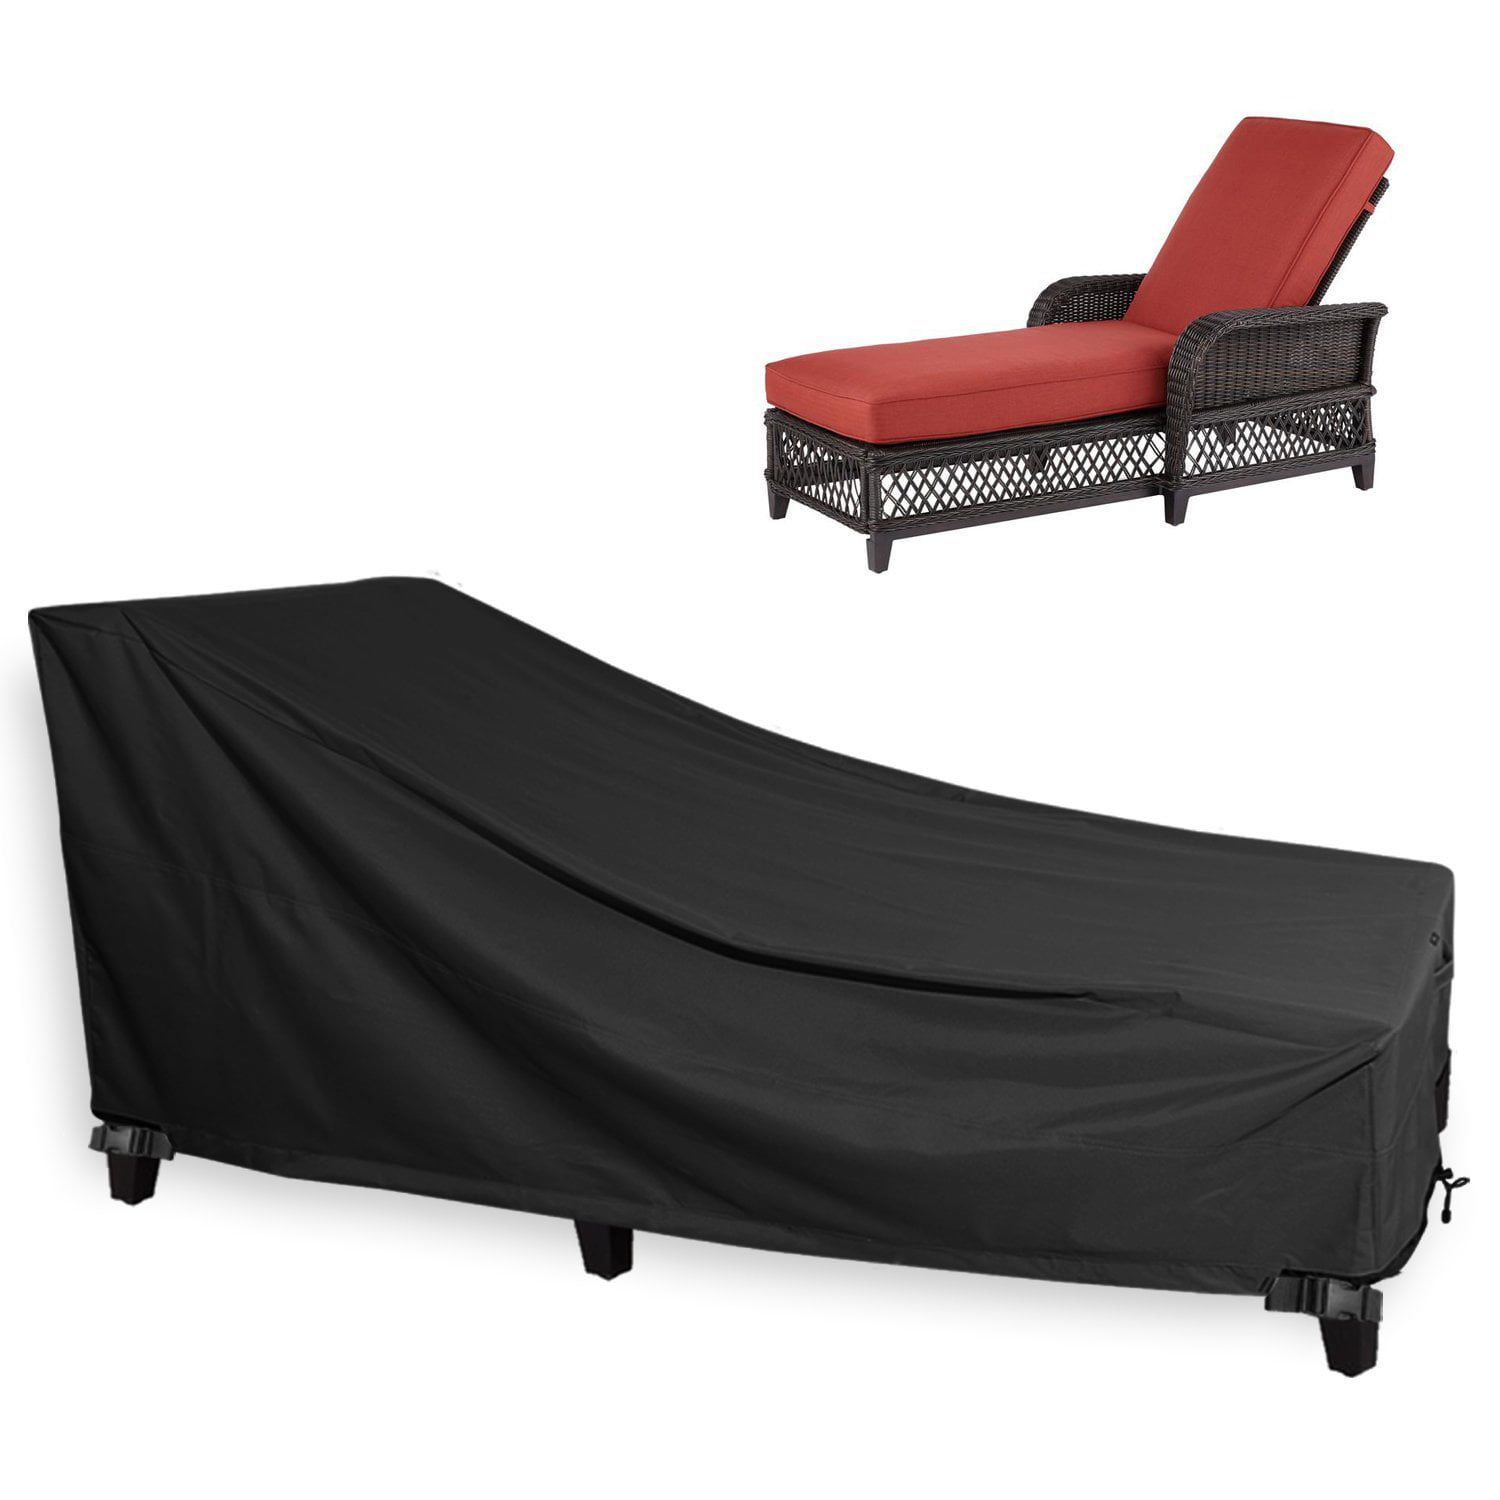 Simple Lounge Chair Outdoor Covers for Large Space